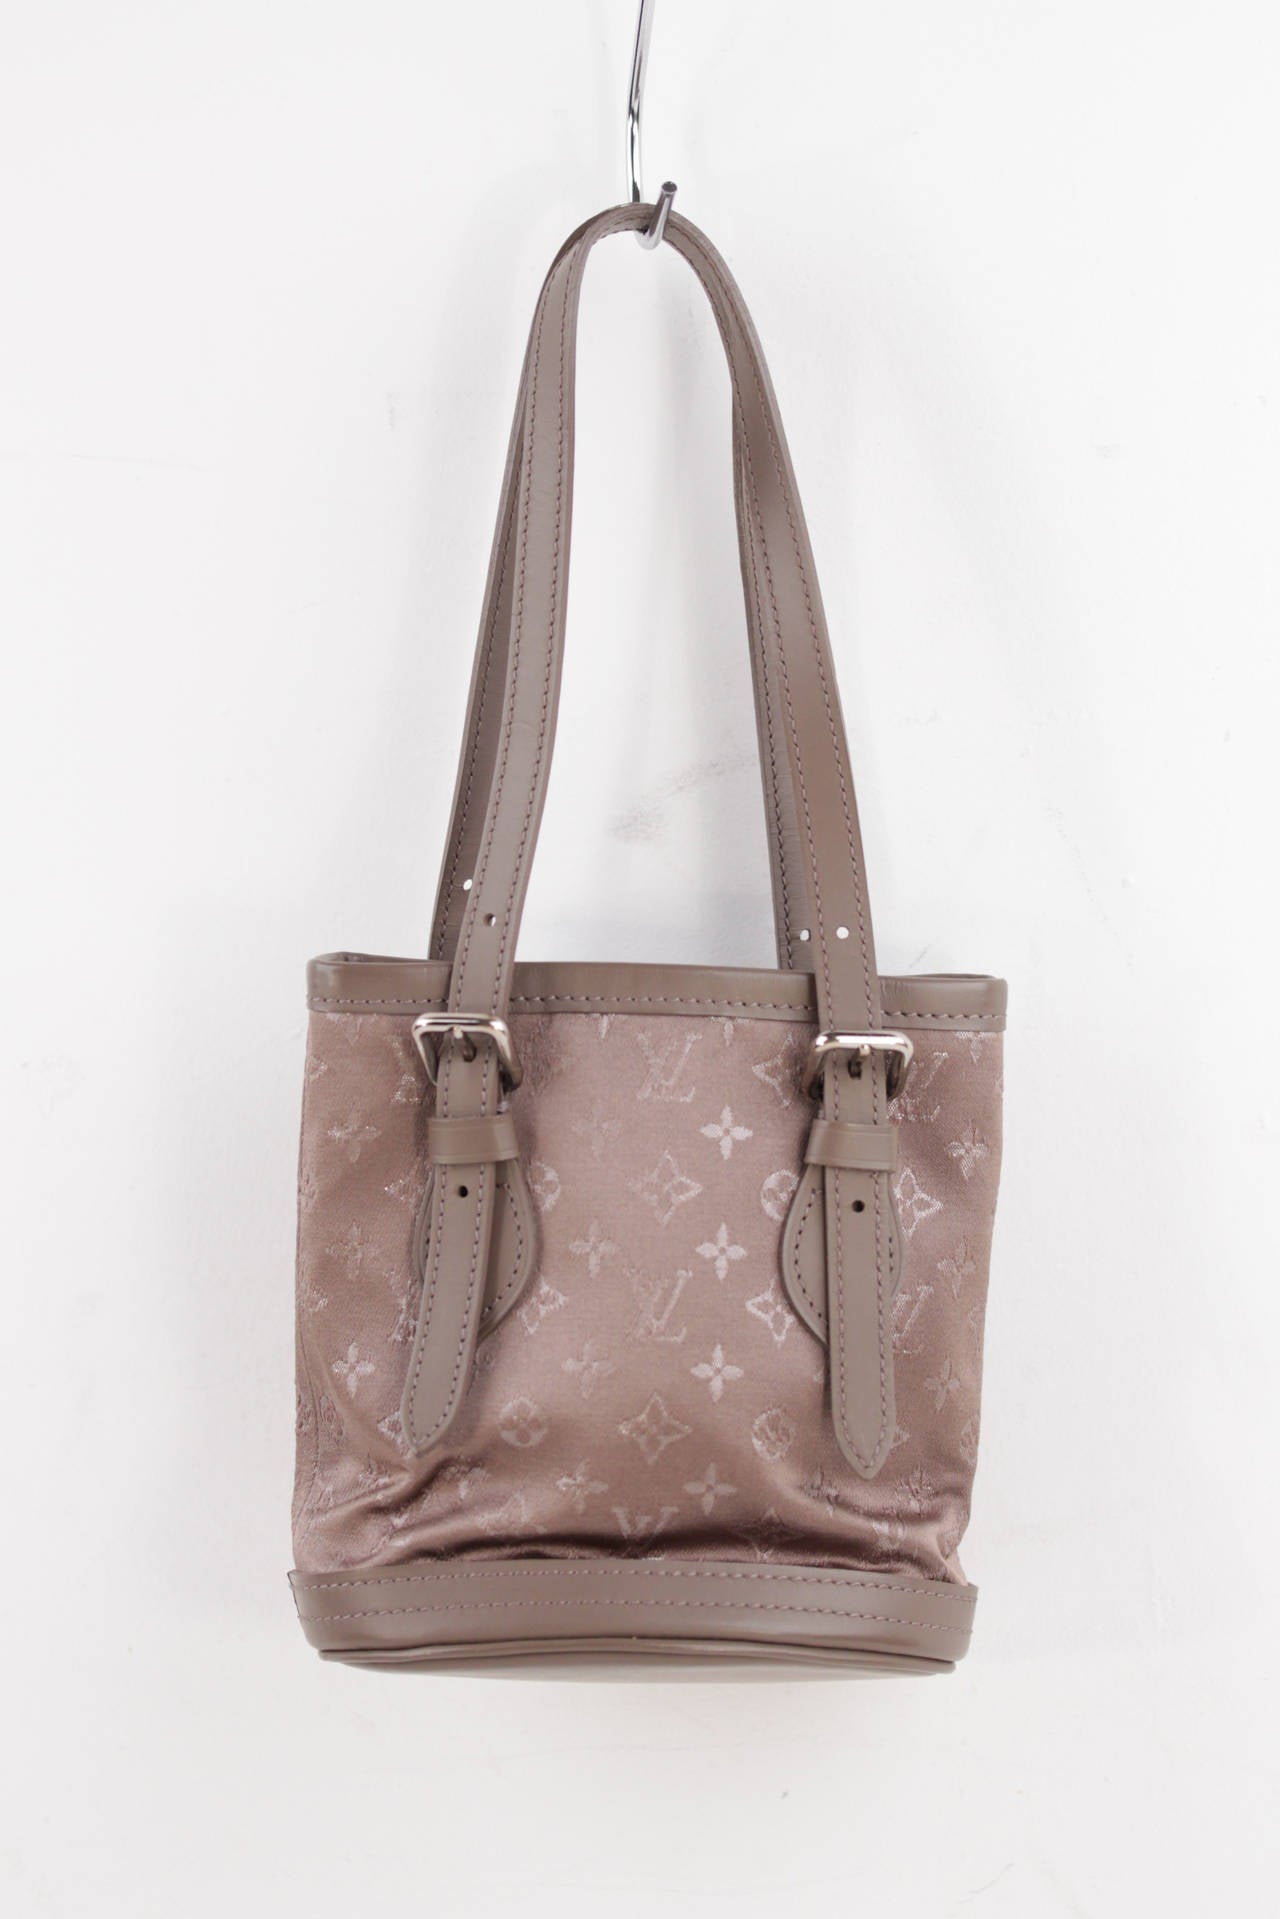 - Model : Louis Vuitton 'Monogram Satin' Mini Bucklet - Monogram Satin canvas in taupe color - Genuine leather details - Silver metal hardware - Open top - Brown Satin interior - This Micro Mini Bucket bag is the shrunken down version of the iconic